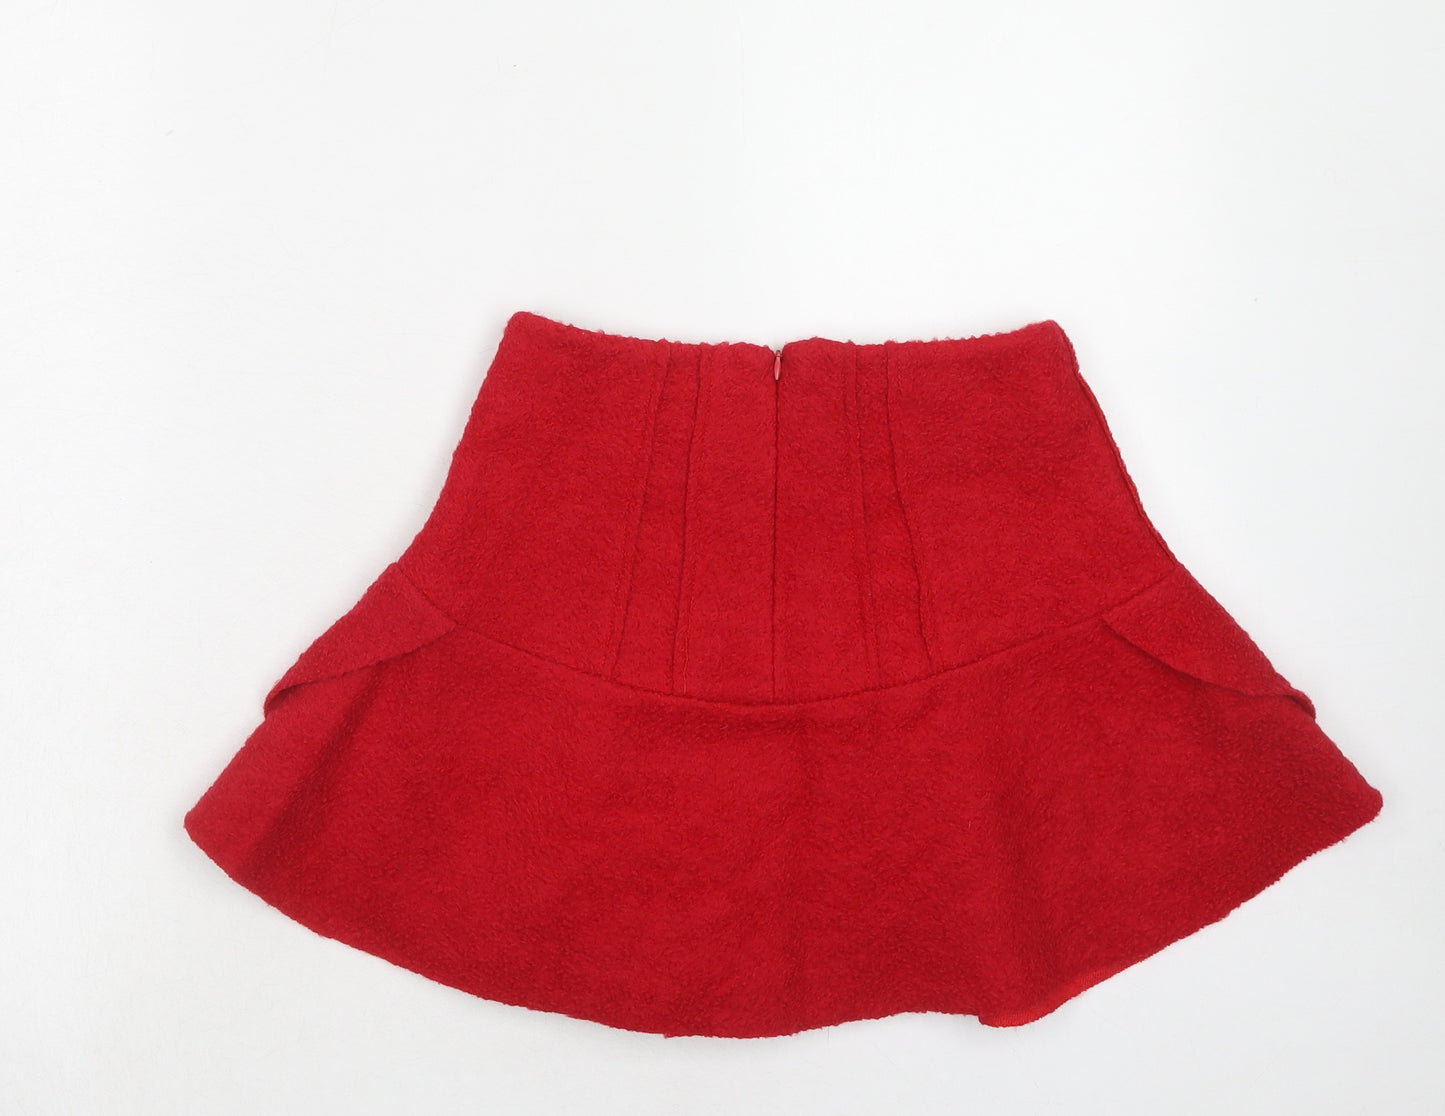 Mystery Womens Red Acrylic Skater Skirt Size S Zip